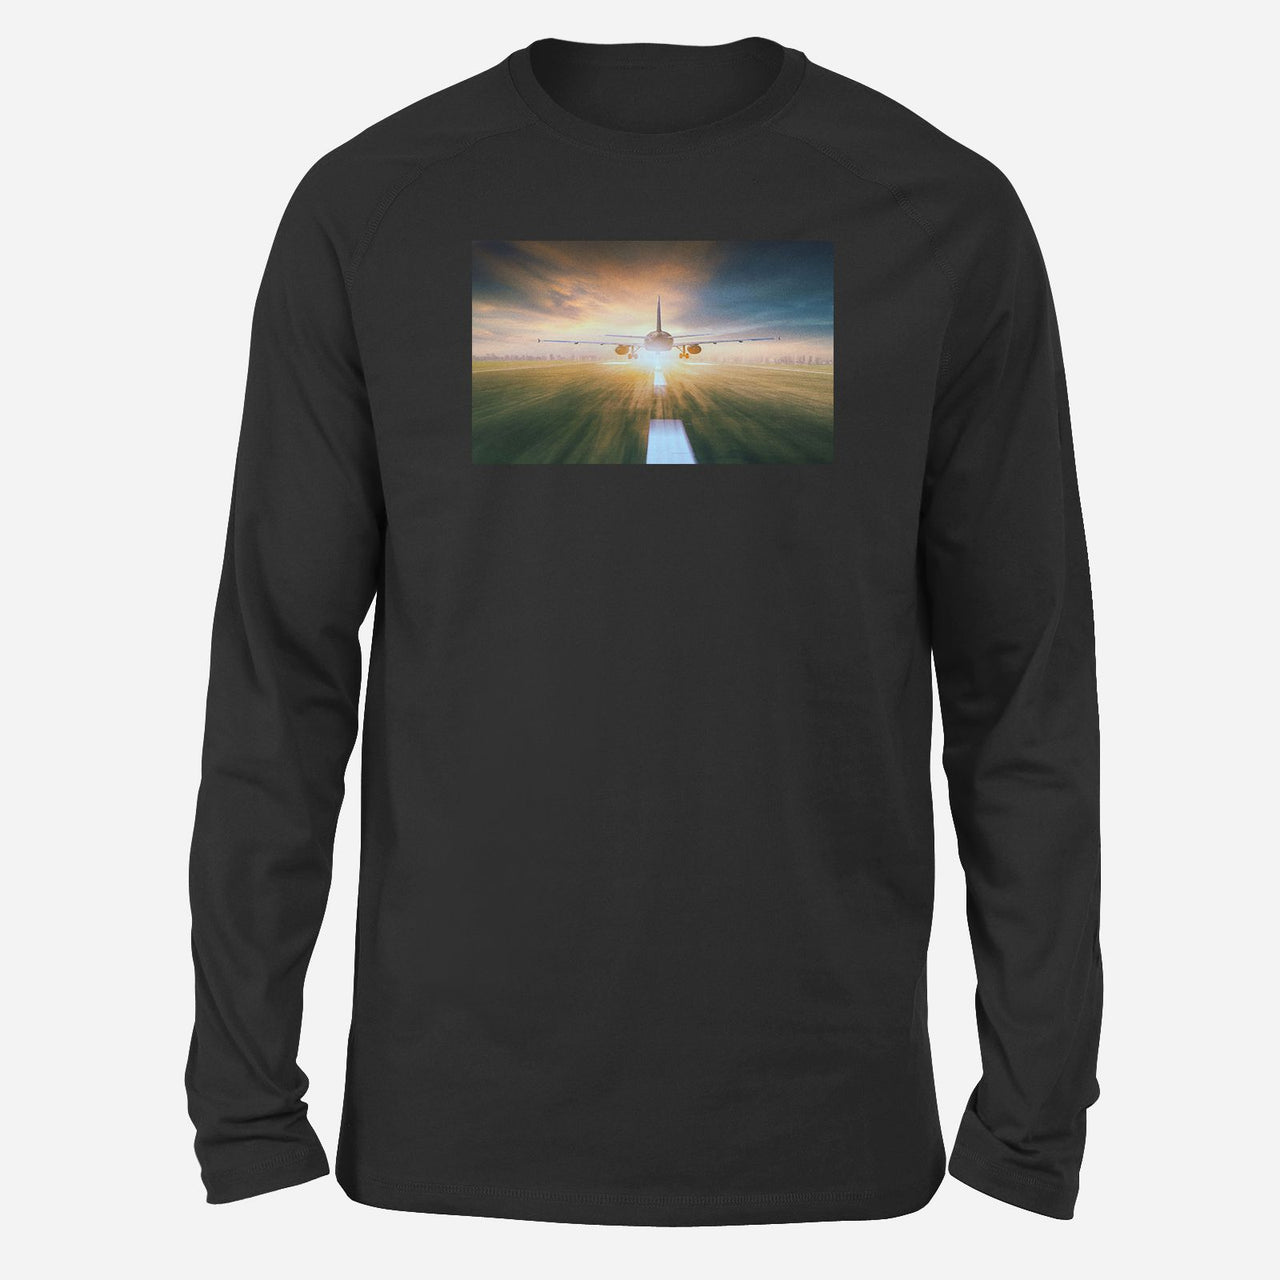 Airplane Flying Over Runway Designed Long-Sleeve T-Shirts